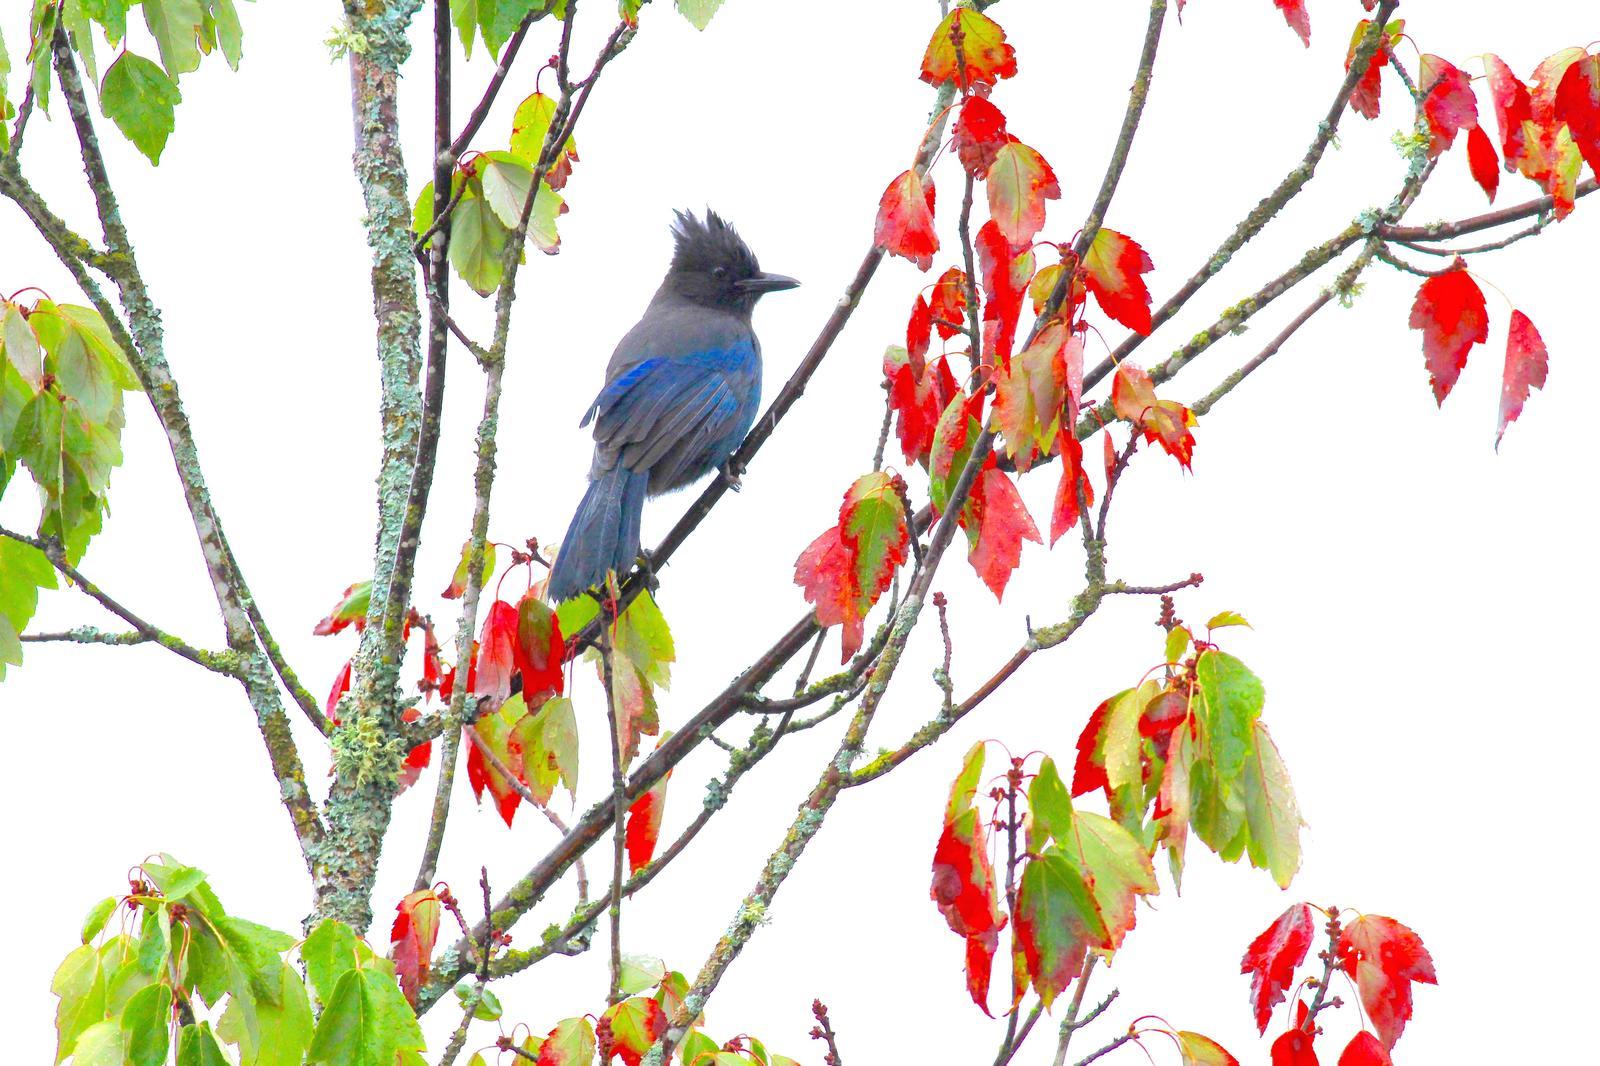 Steller's Jay Photo by Kathryn Keith